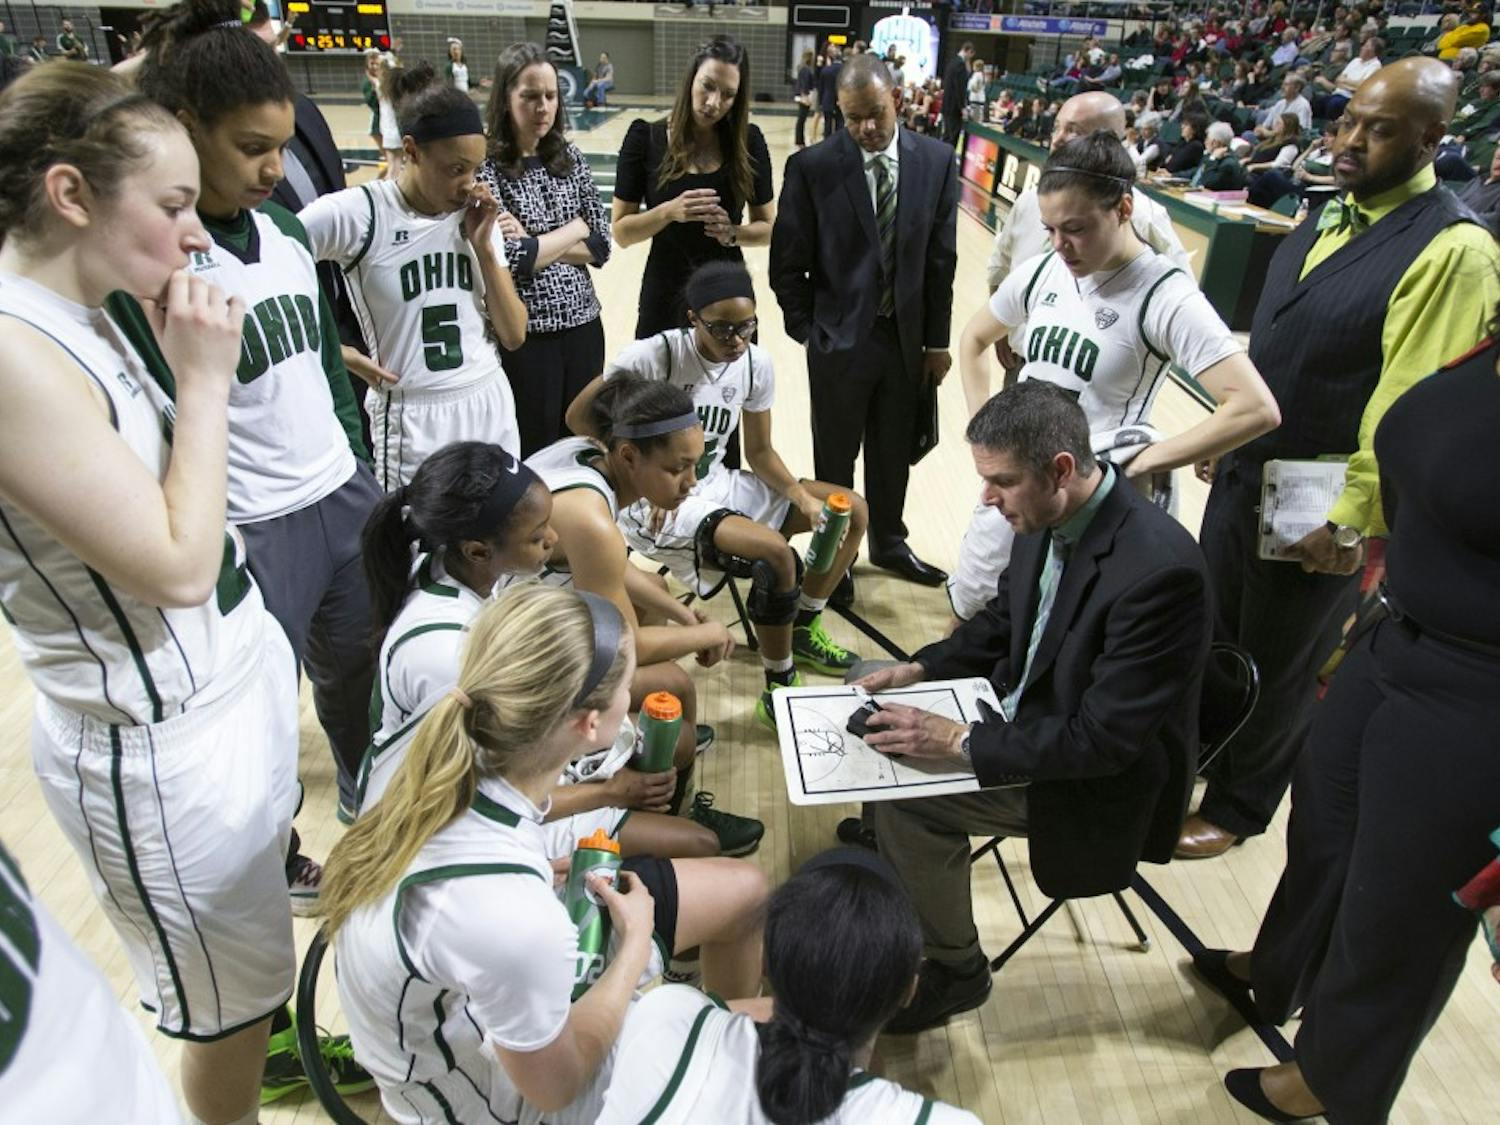 Ohio head coach Bob Boldon goes over strategies during a timeout during Ohio's 72-44 win against rivals Miami (OH) on Feb. 17, 2016. Boldon and the Bobcats play against High Point on Saturday in their first game of the 2016-17 season. (FILE)